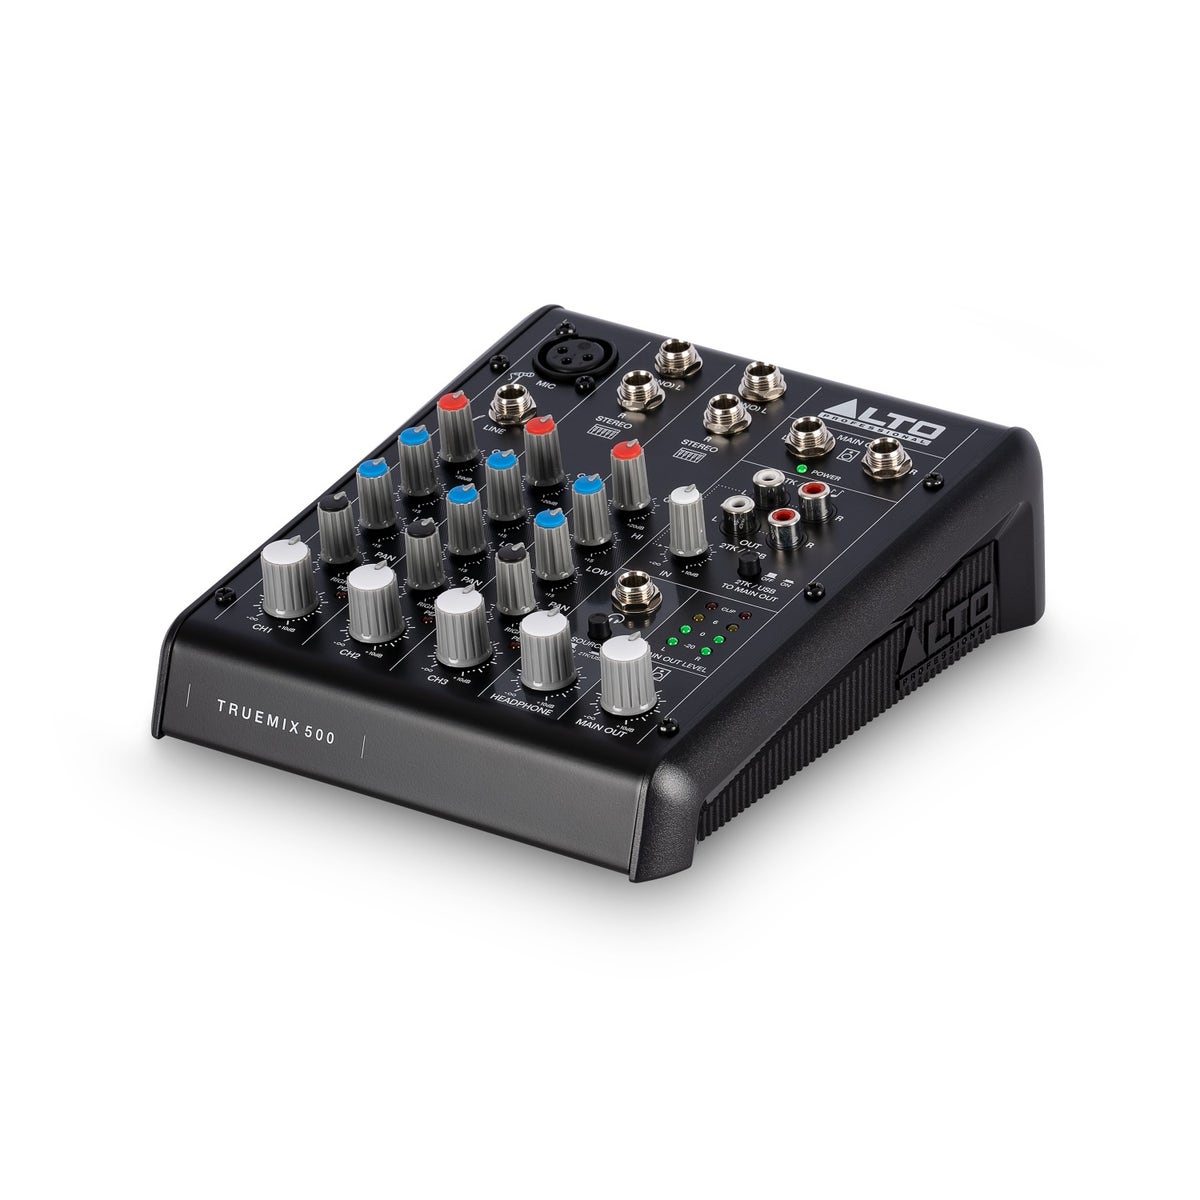 Aflede Profet Thanksgiving Buy Alto Truemix 500 5-channel Analog Mixer with USB | Sam Ash Music